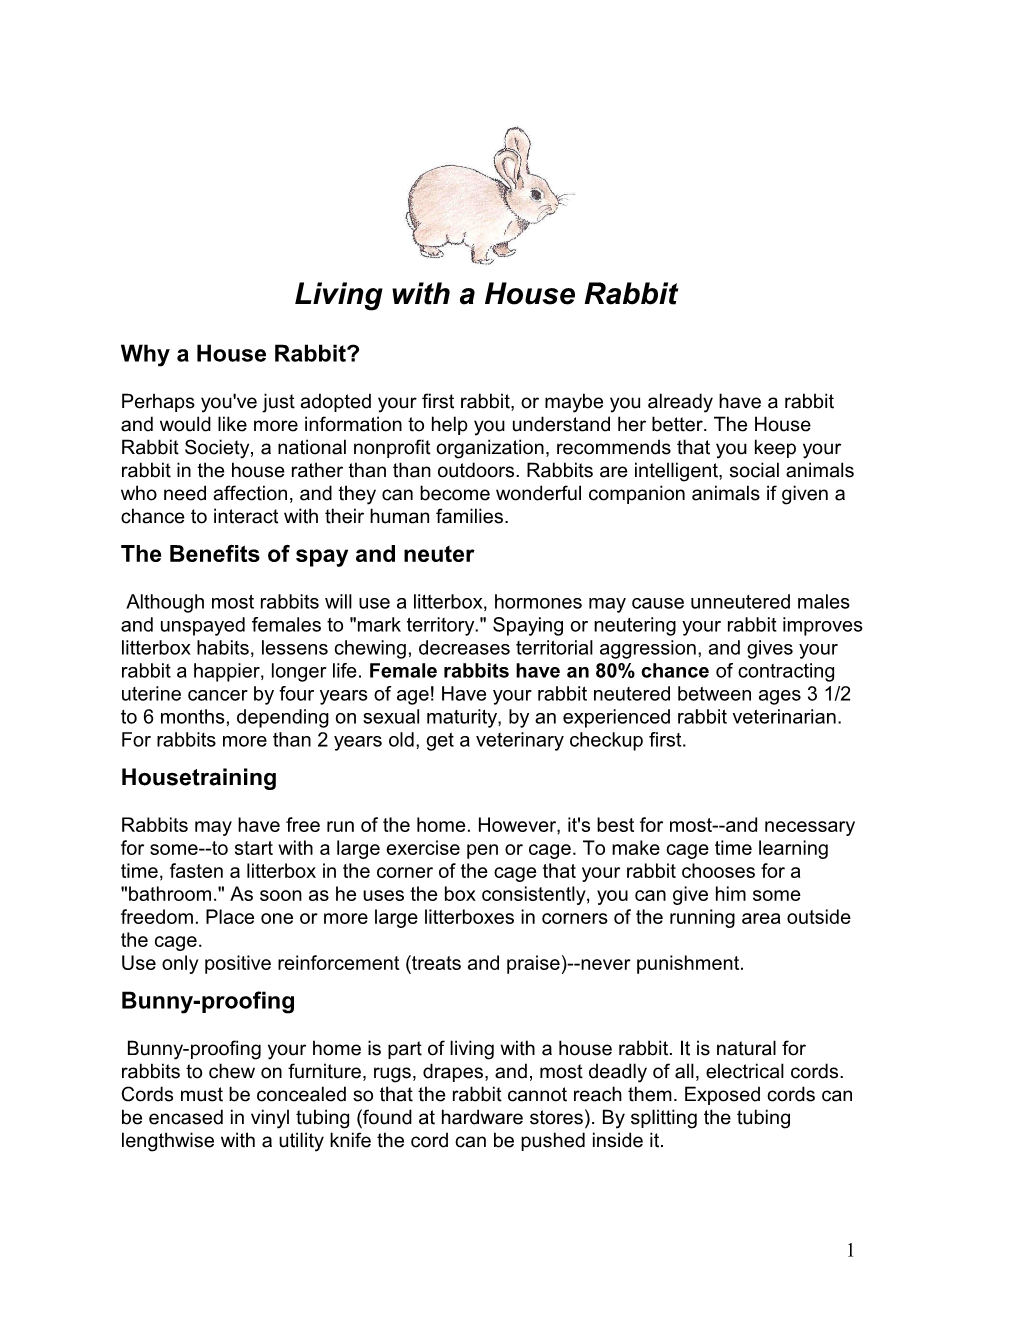 Why a House Rabbit?